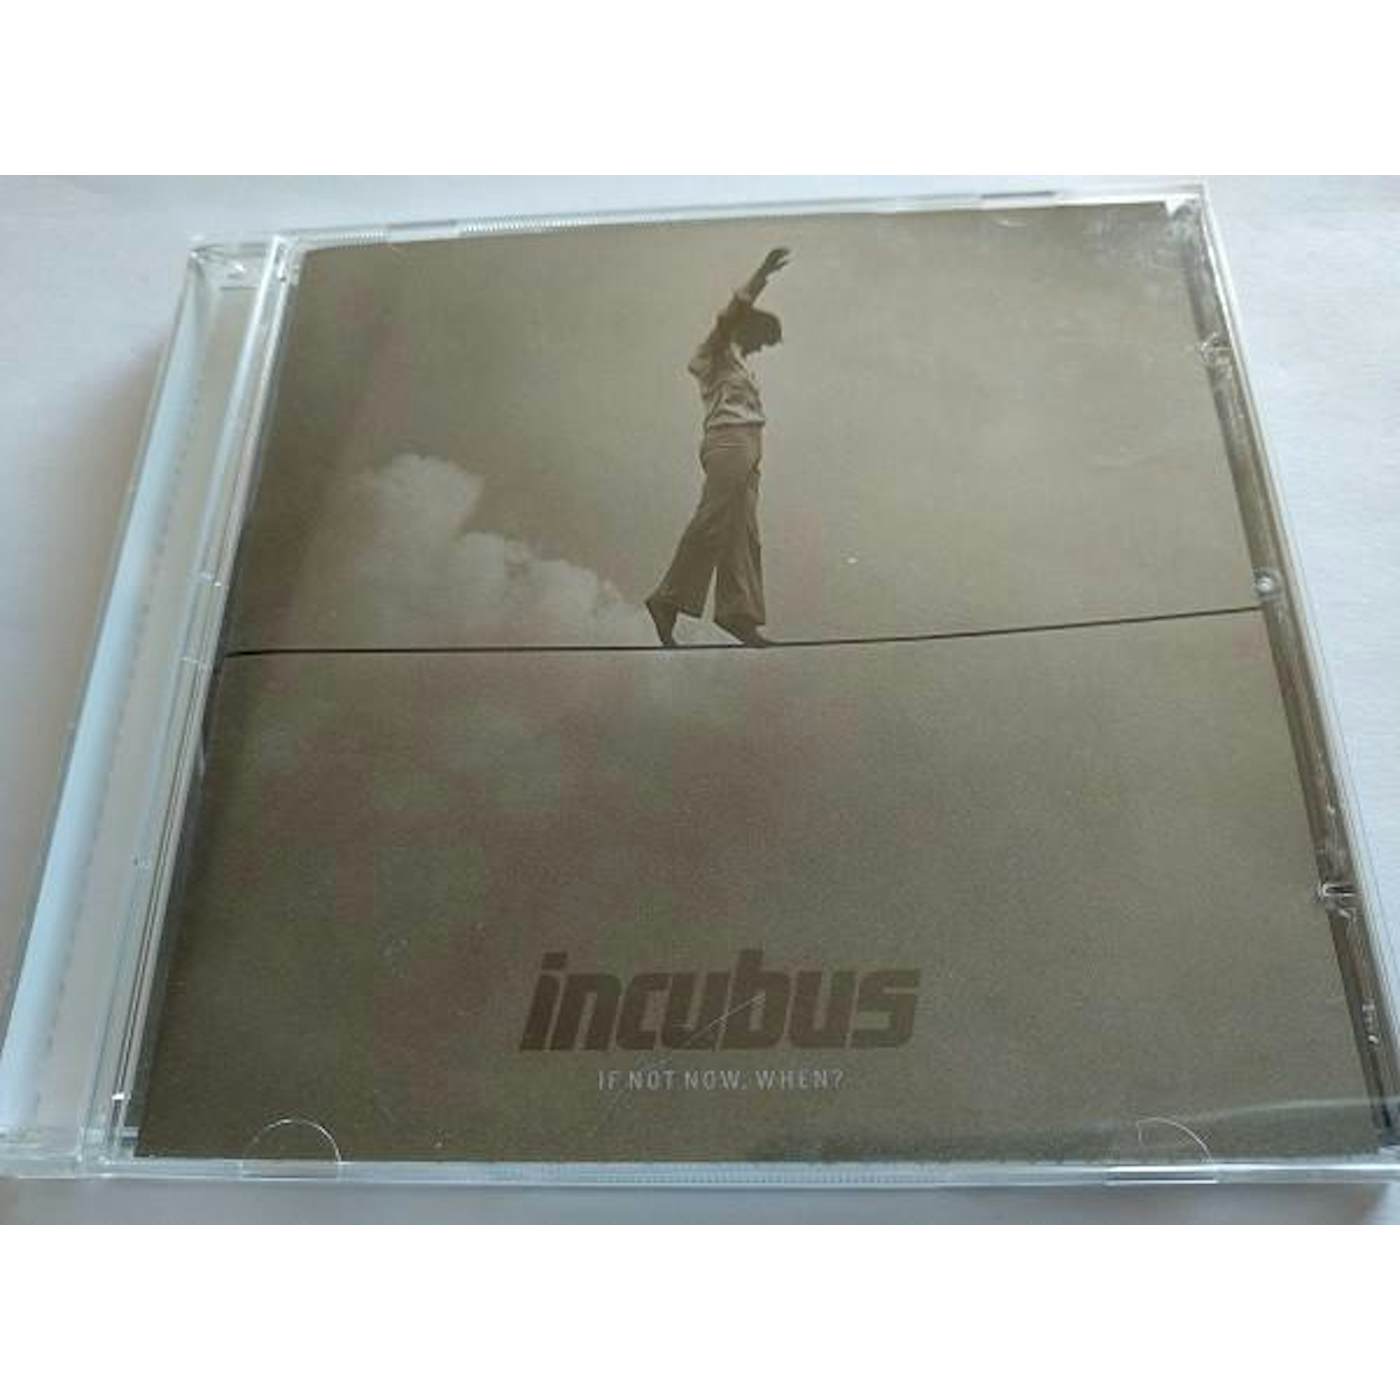 Incubus IF NOT NOW, WHEN? CD